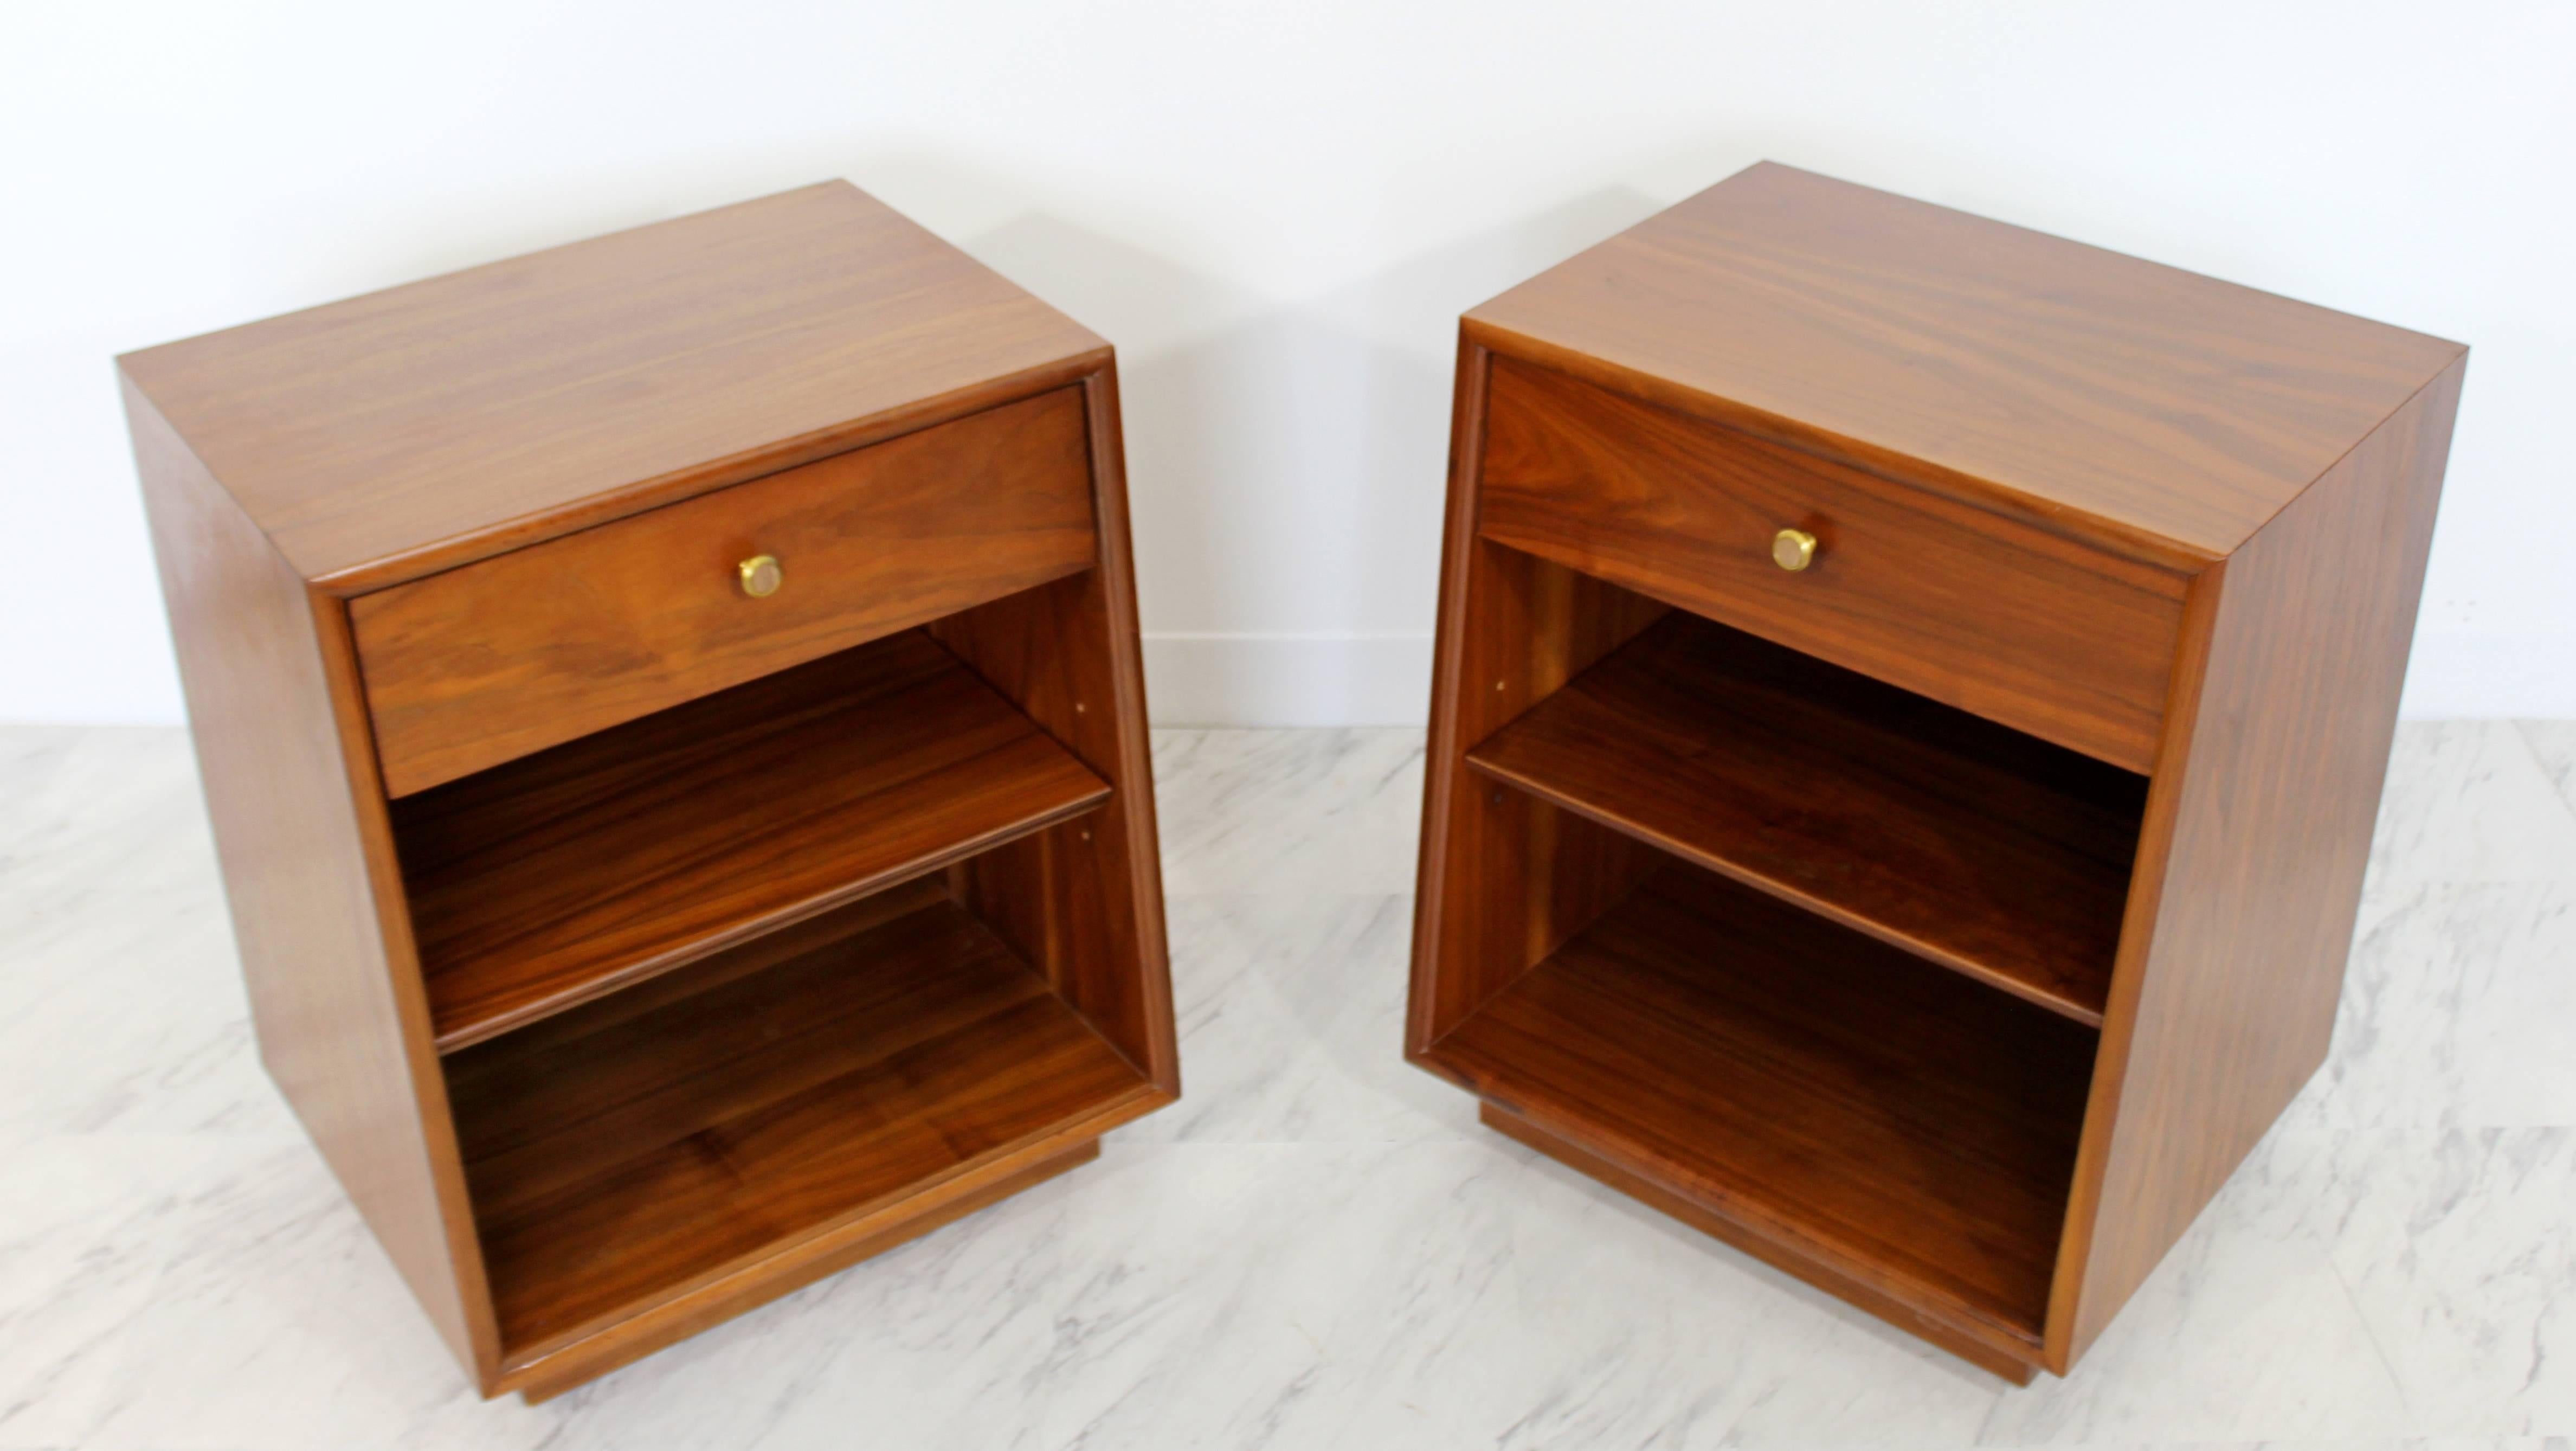 For your consideration is a phenomenal pair of walnut nightstands, with one drawer each that have brass and wood knobs, by Kipp Stewart for Drexel, Declaration, circa 1960s. In excellent condition. The dimensions of each are 20